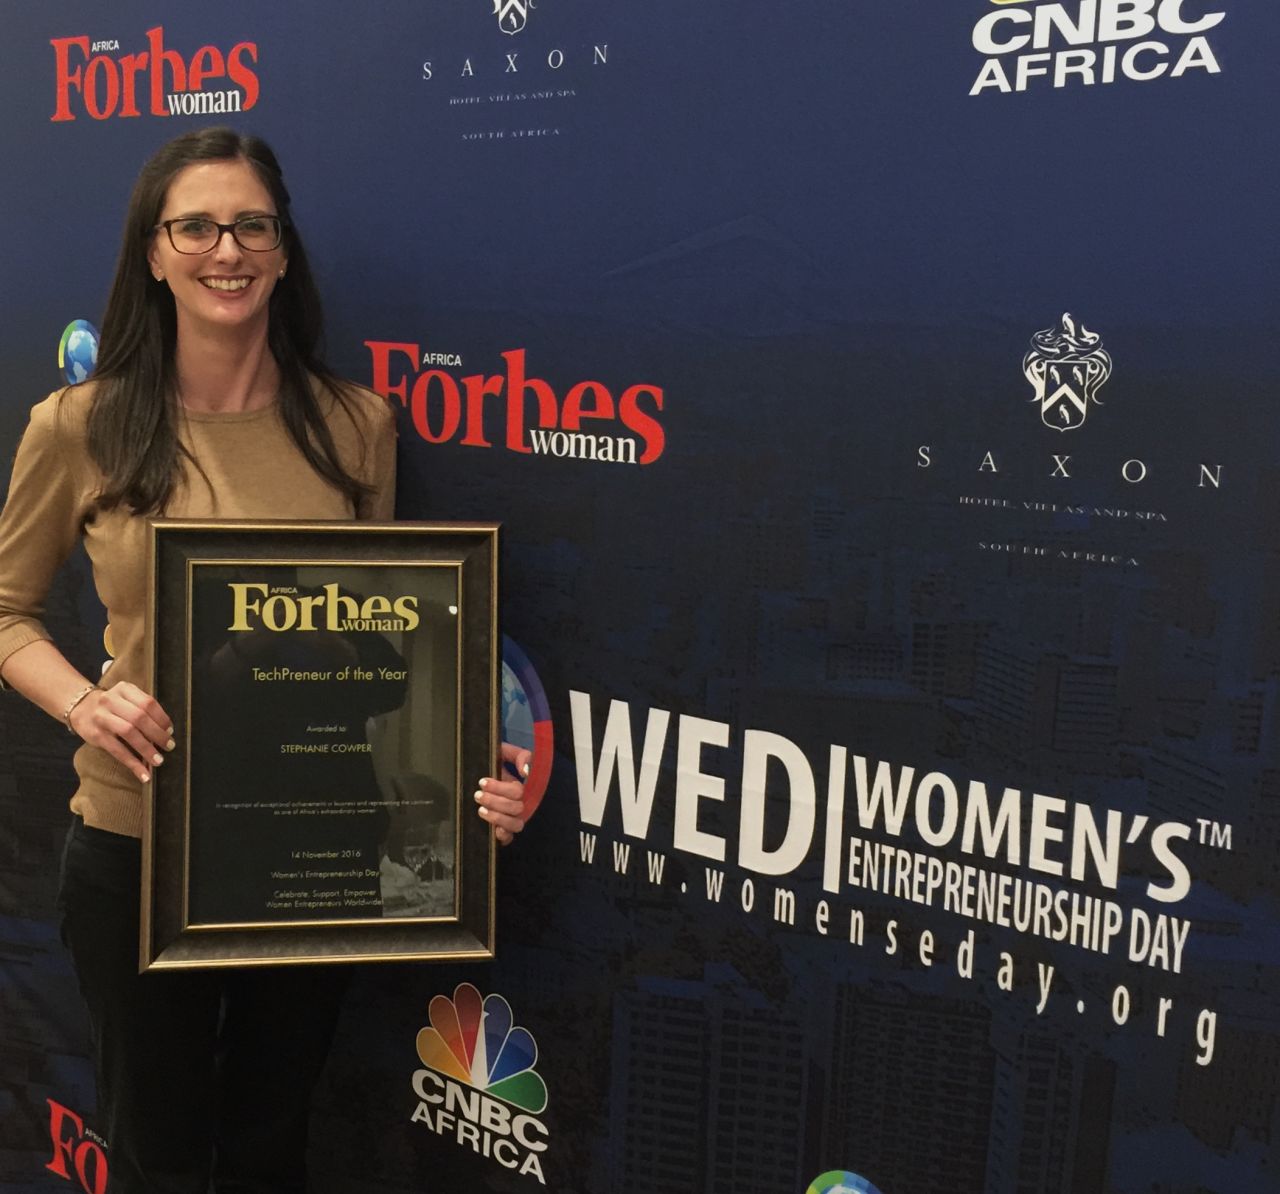 BeSpecular's CEO Stephanie Cowper received the Forbes Woman Techpreneur of the Year Award in November 2016. She conceived the idea in 2014 with college classmate Giacomo Parmeggiani from Italy, now CTO.